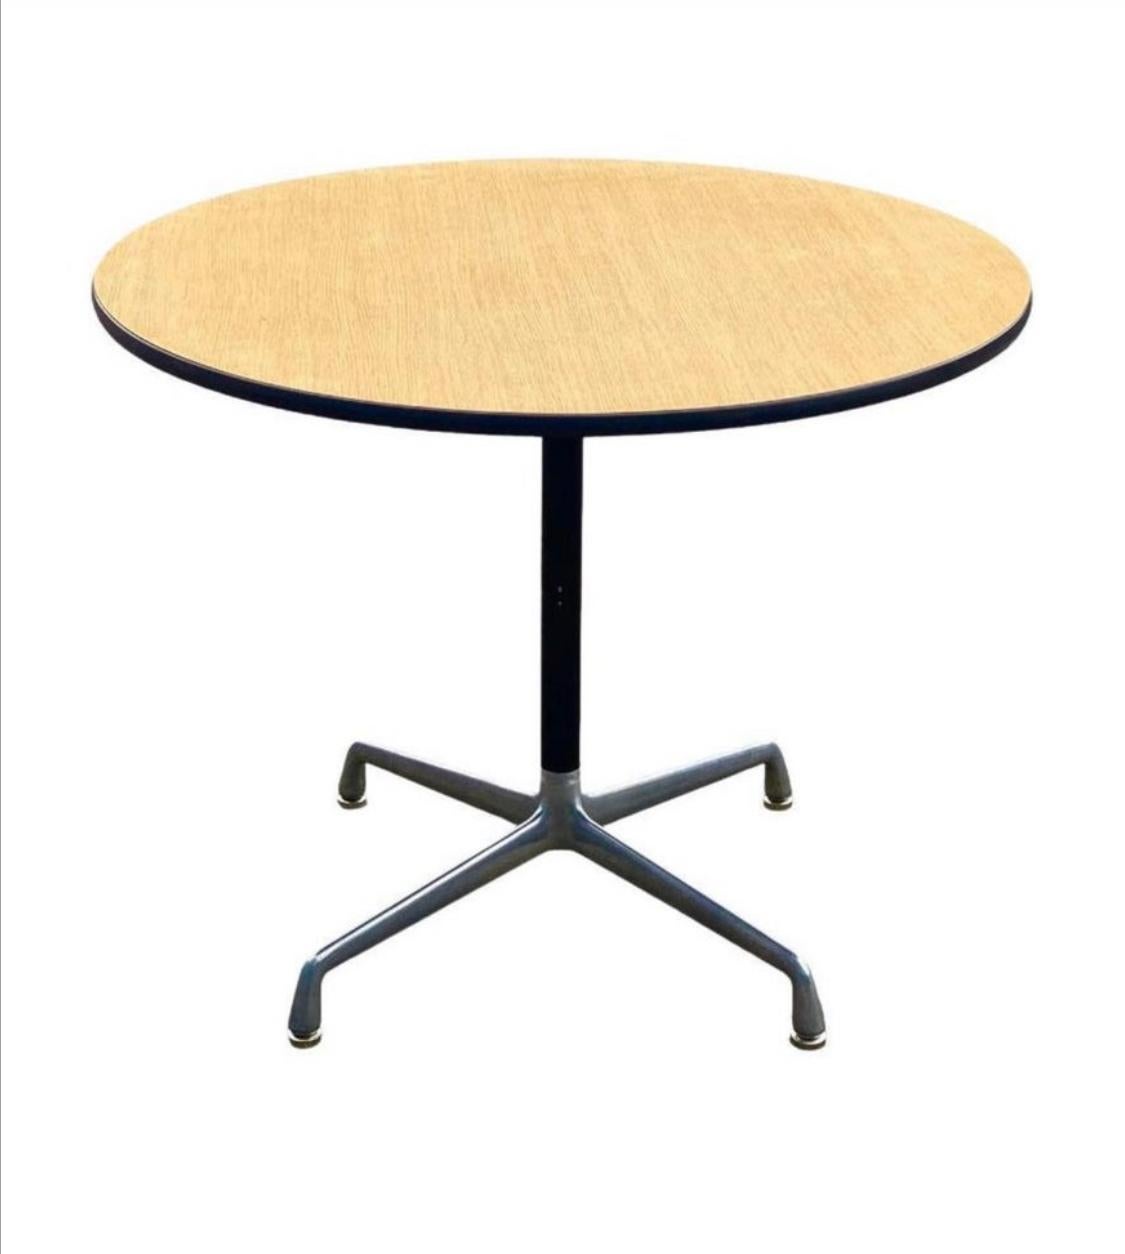 Aluminum Herman Miller Eames 36” Dining Table For Sale